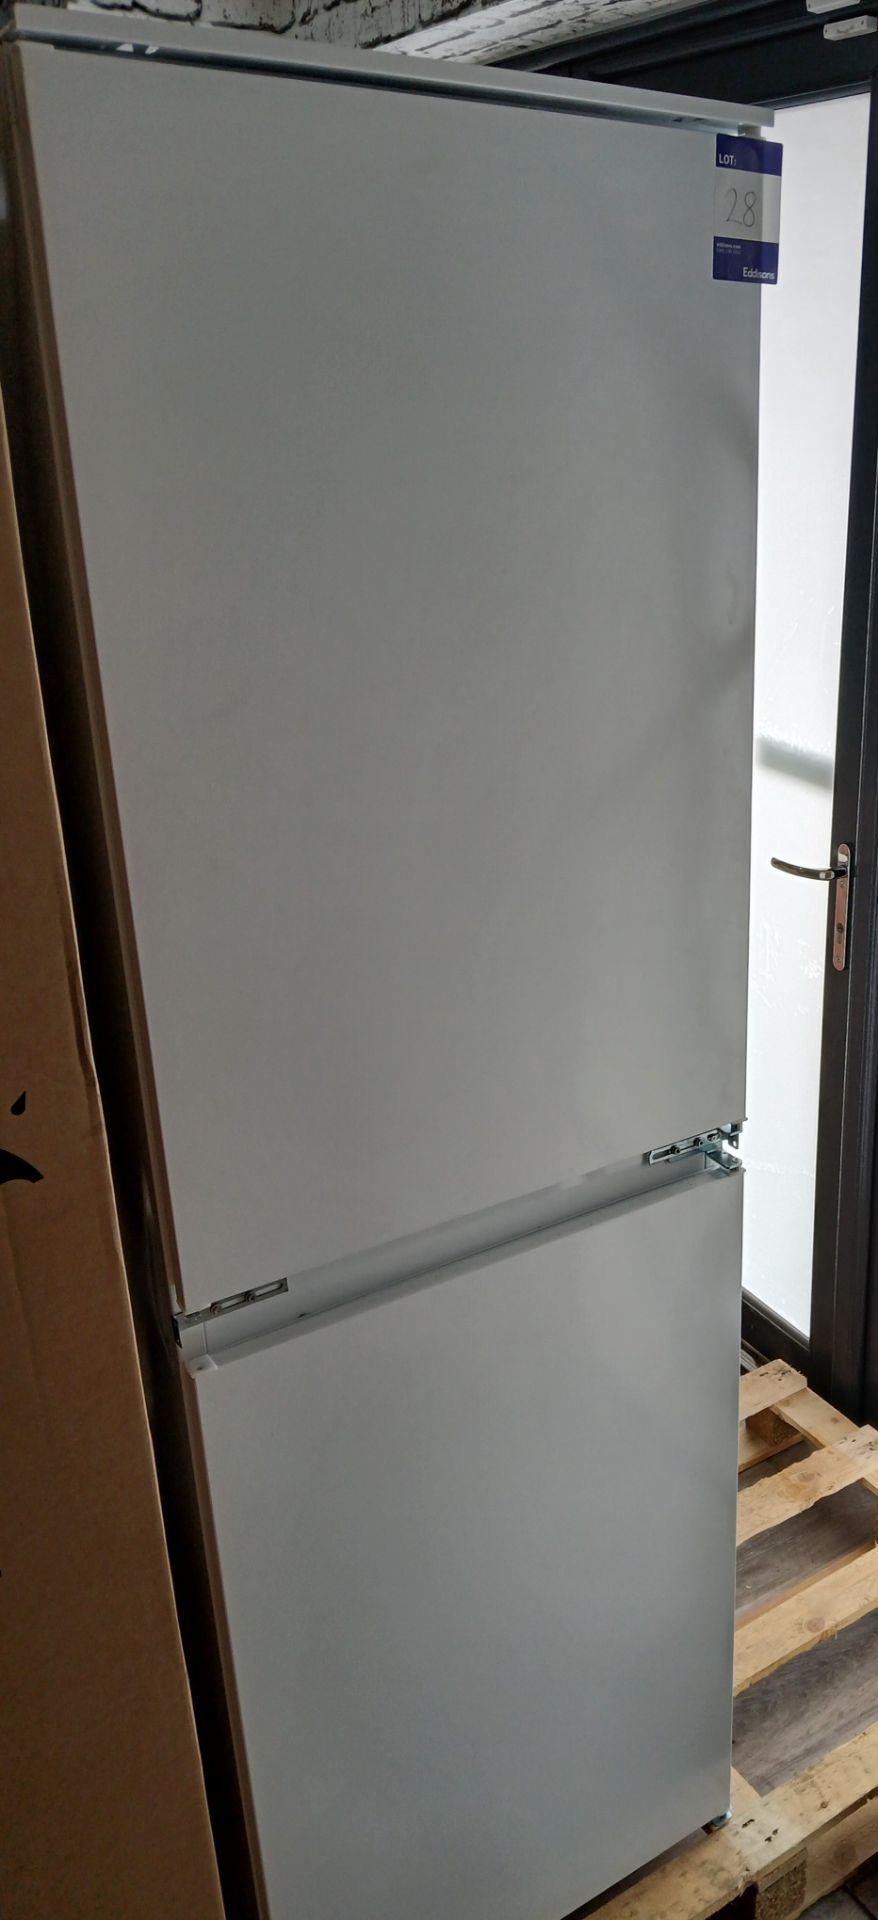 Zanussi ZNNN18FS5 Fridge Freezer (Please note, Viewing Strongly Recommended - Eddisons have not